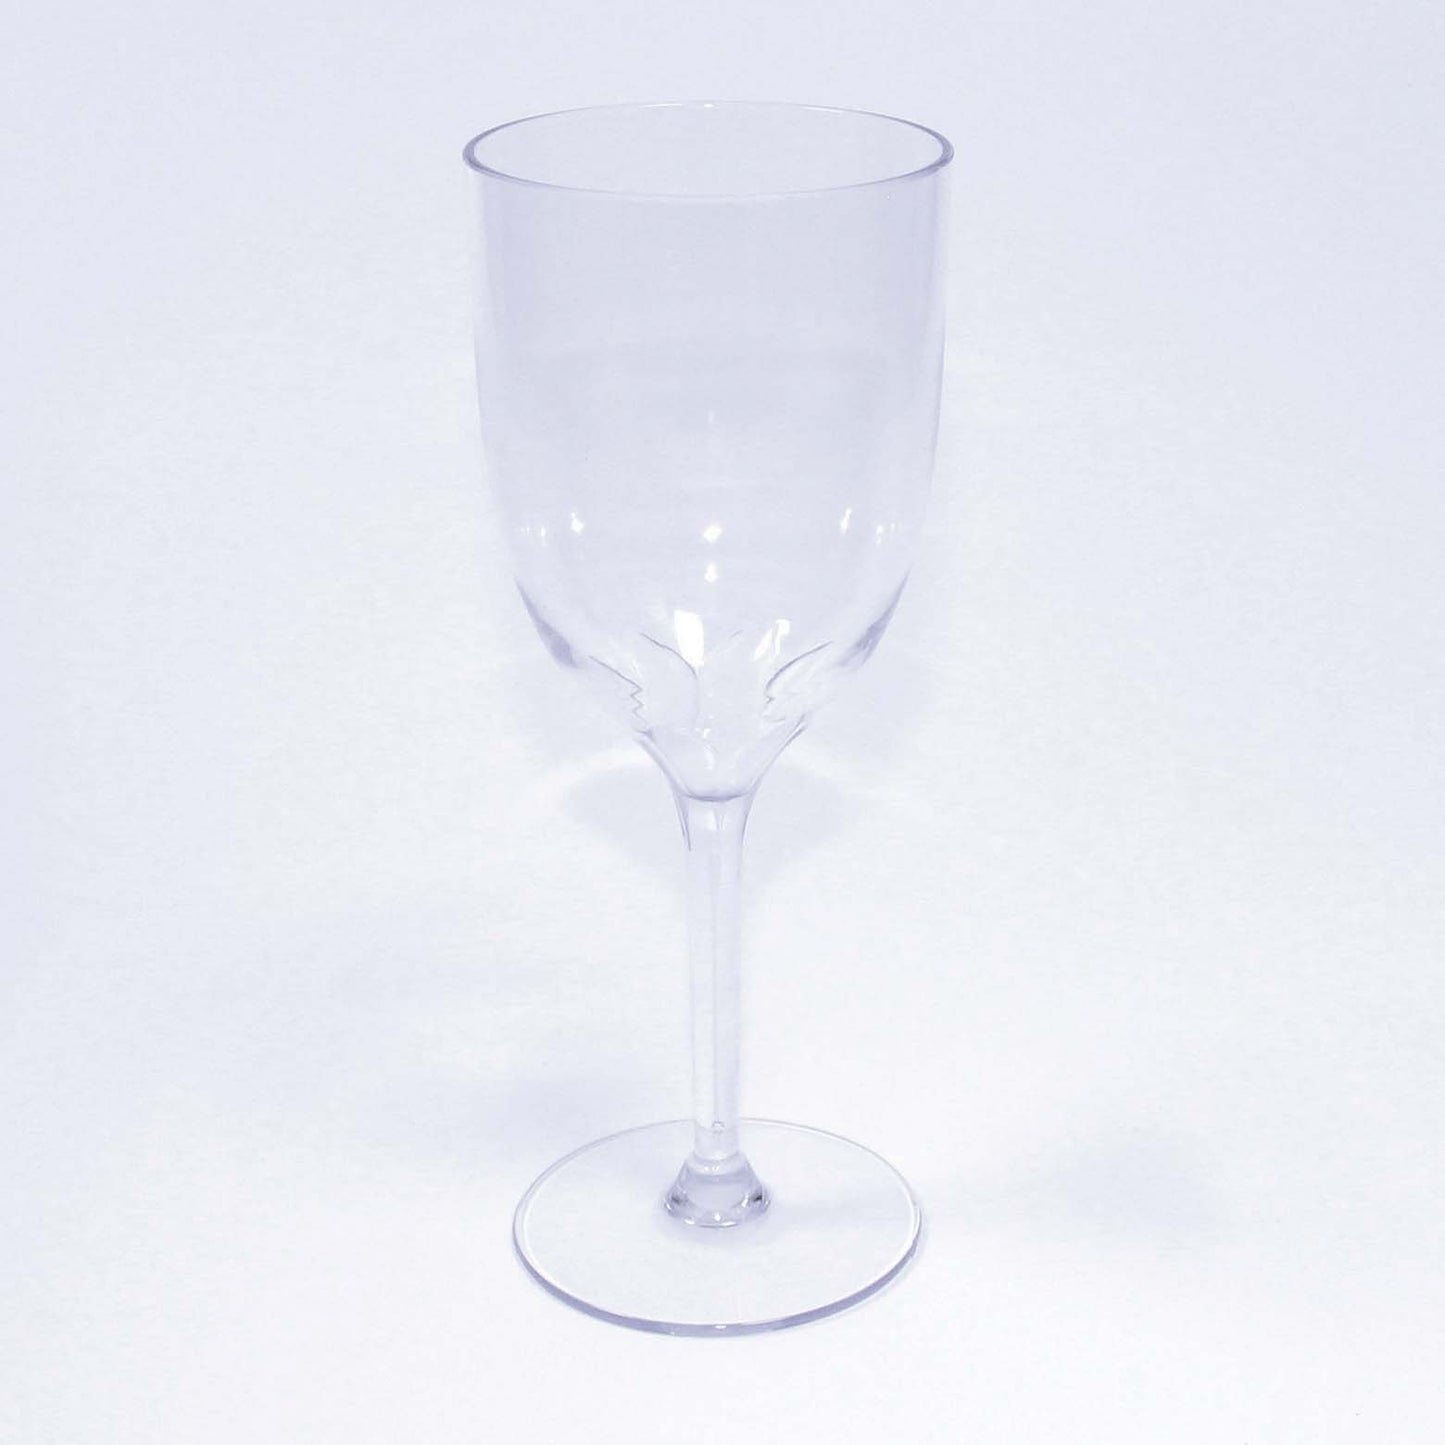 12 x Clear Reusable Wine Glasses with Petal Decoration 350ml Dishwasher Safe